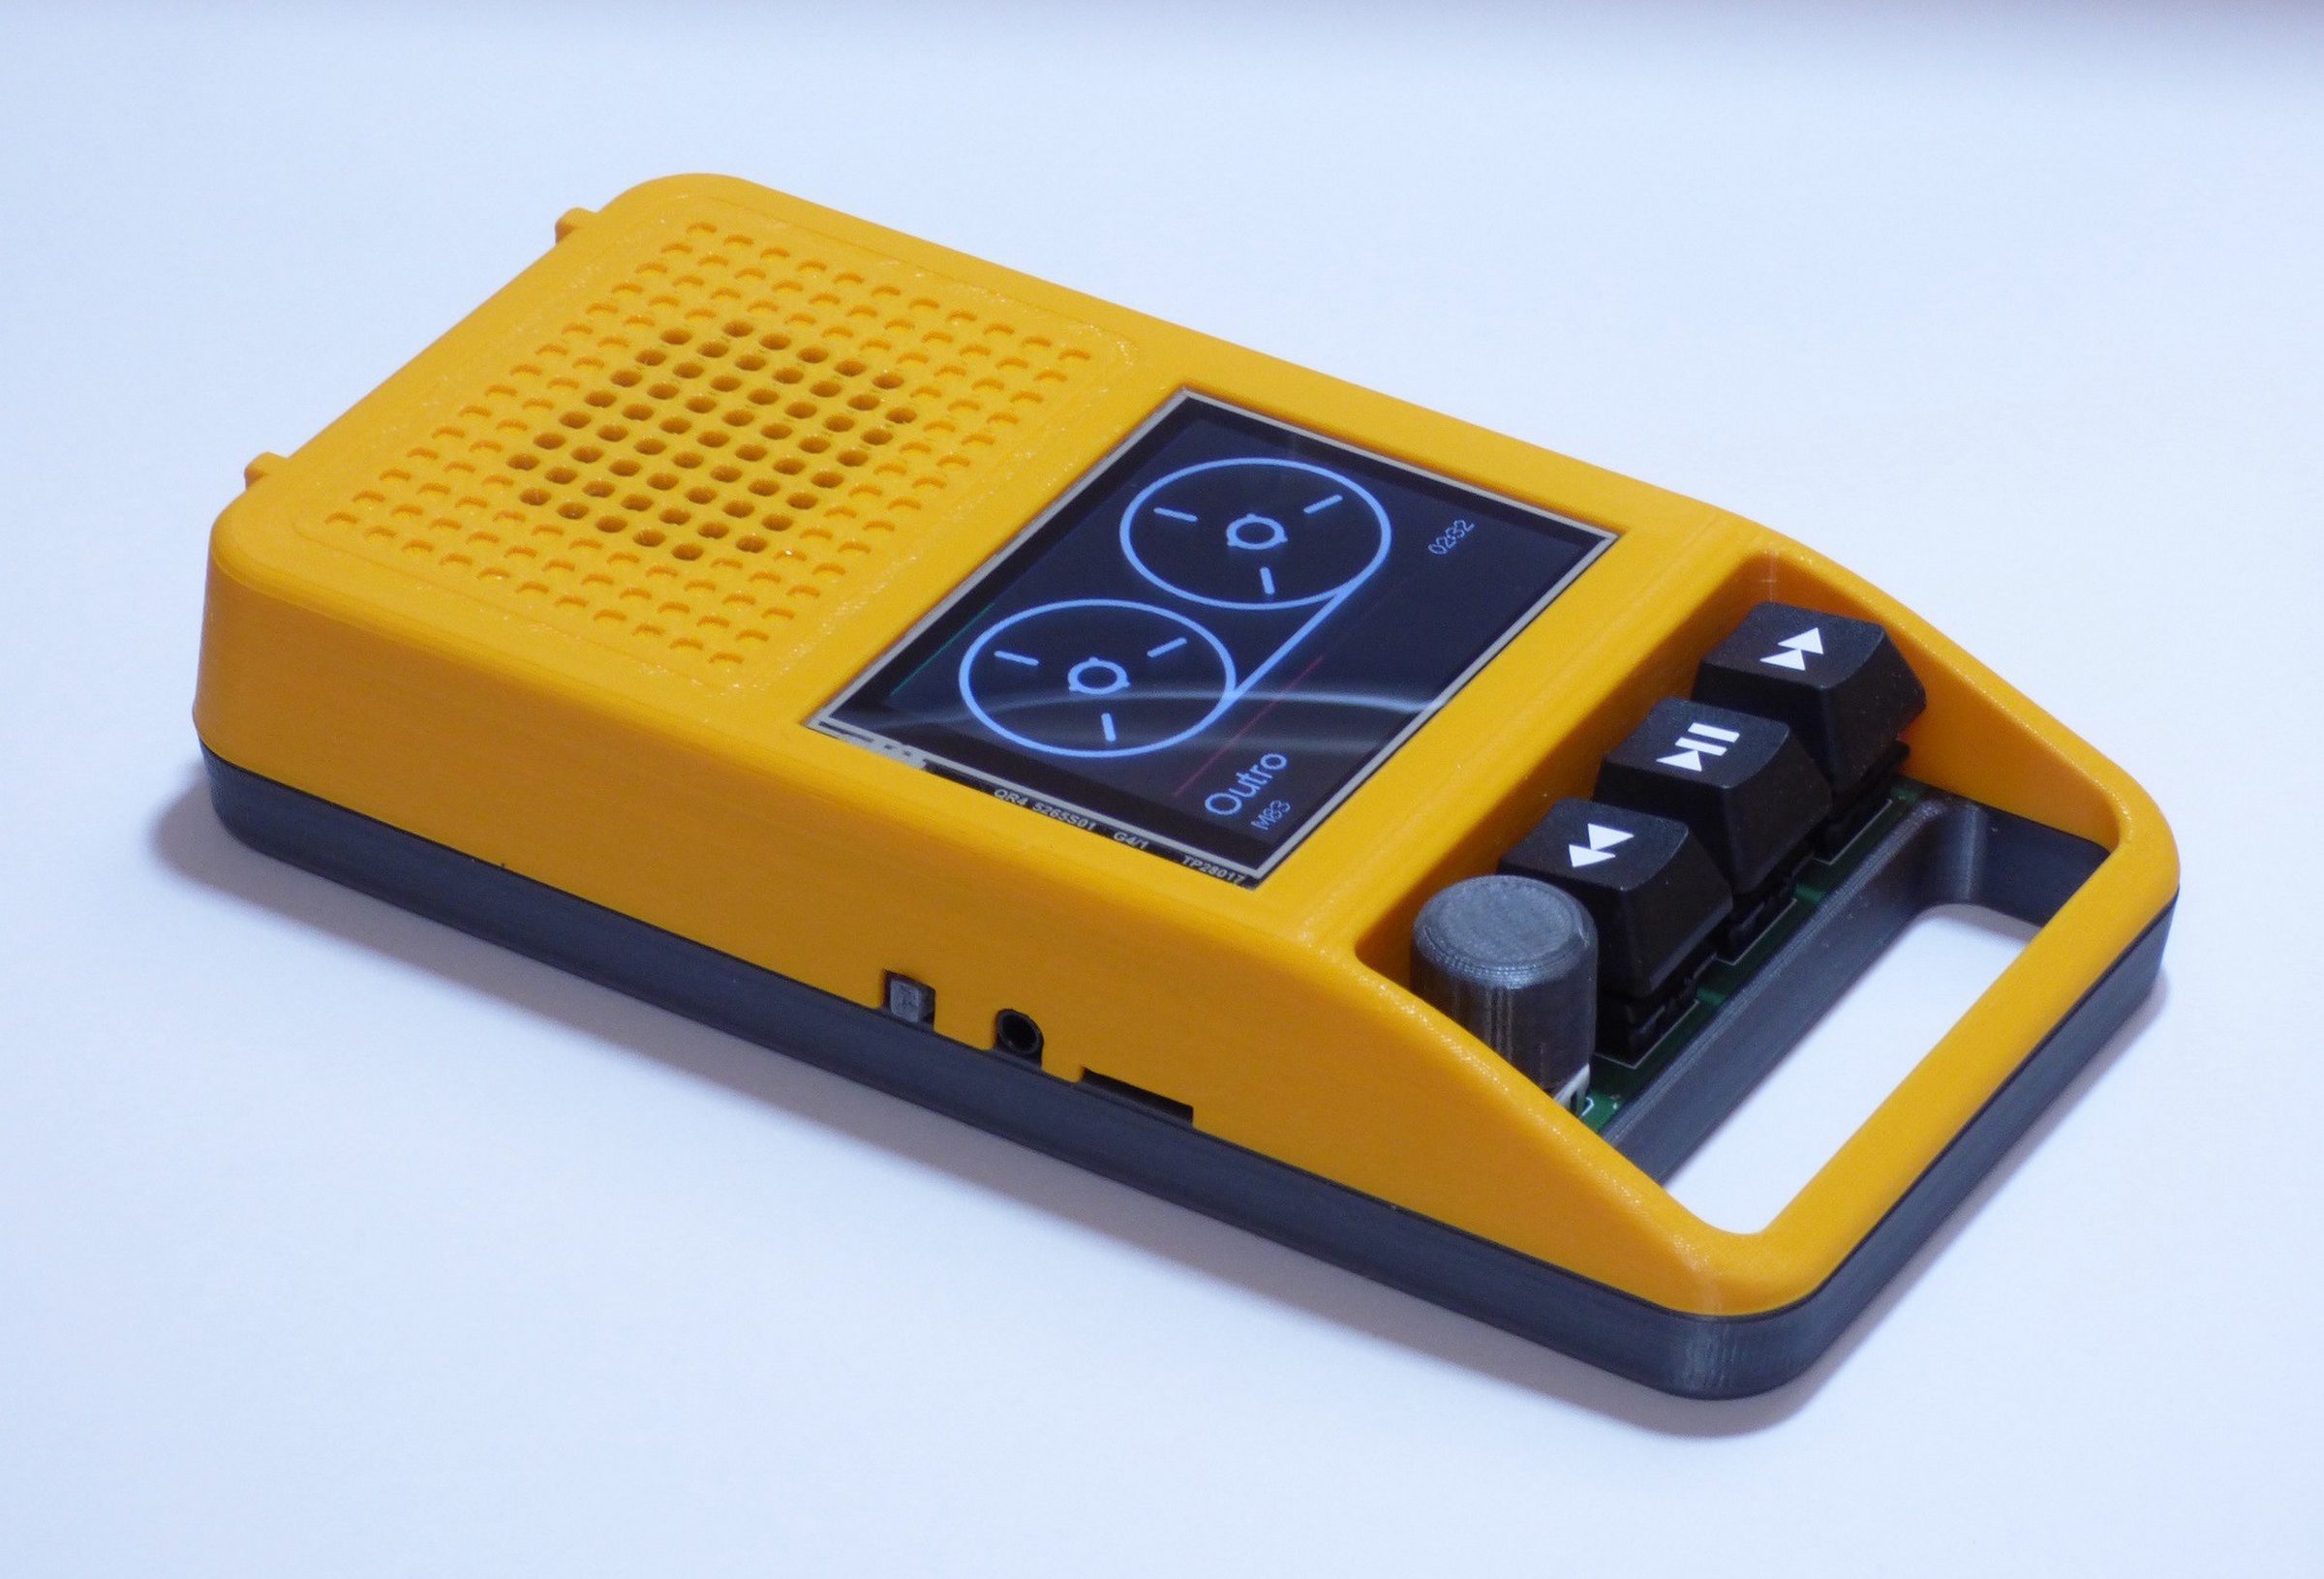 This retro-looking portable MP3 player you can build yourself